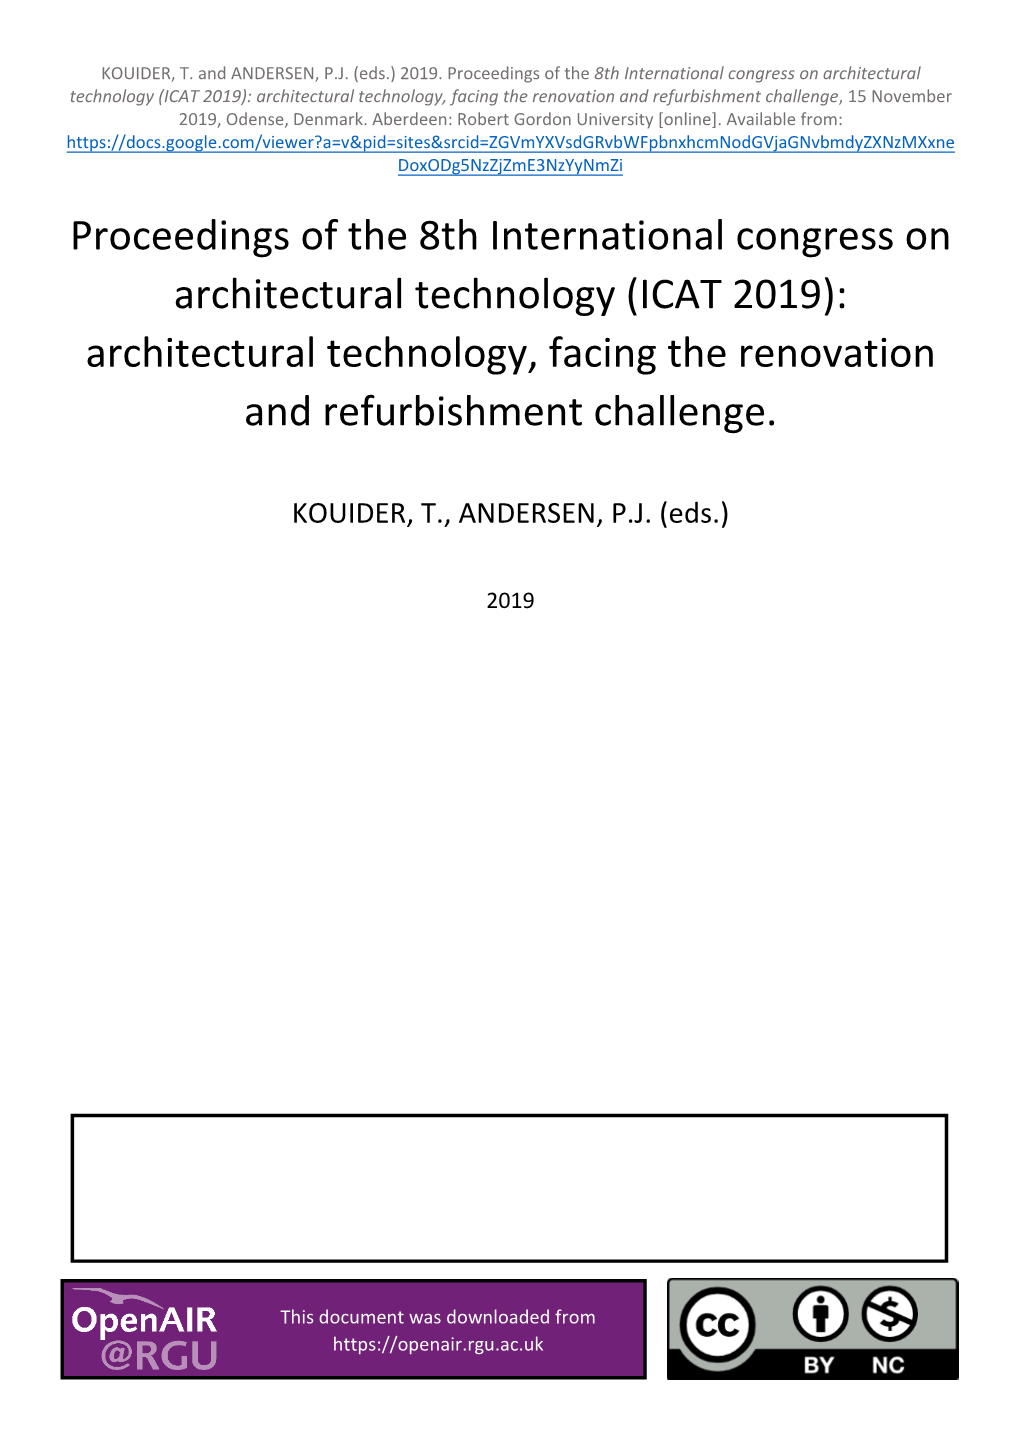 Proceedings of the 8Th International Congress on Architectural